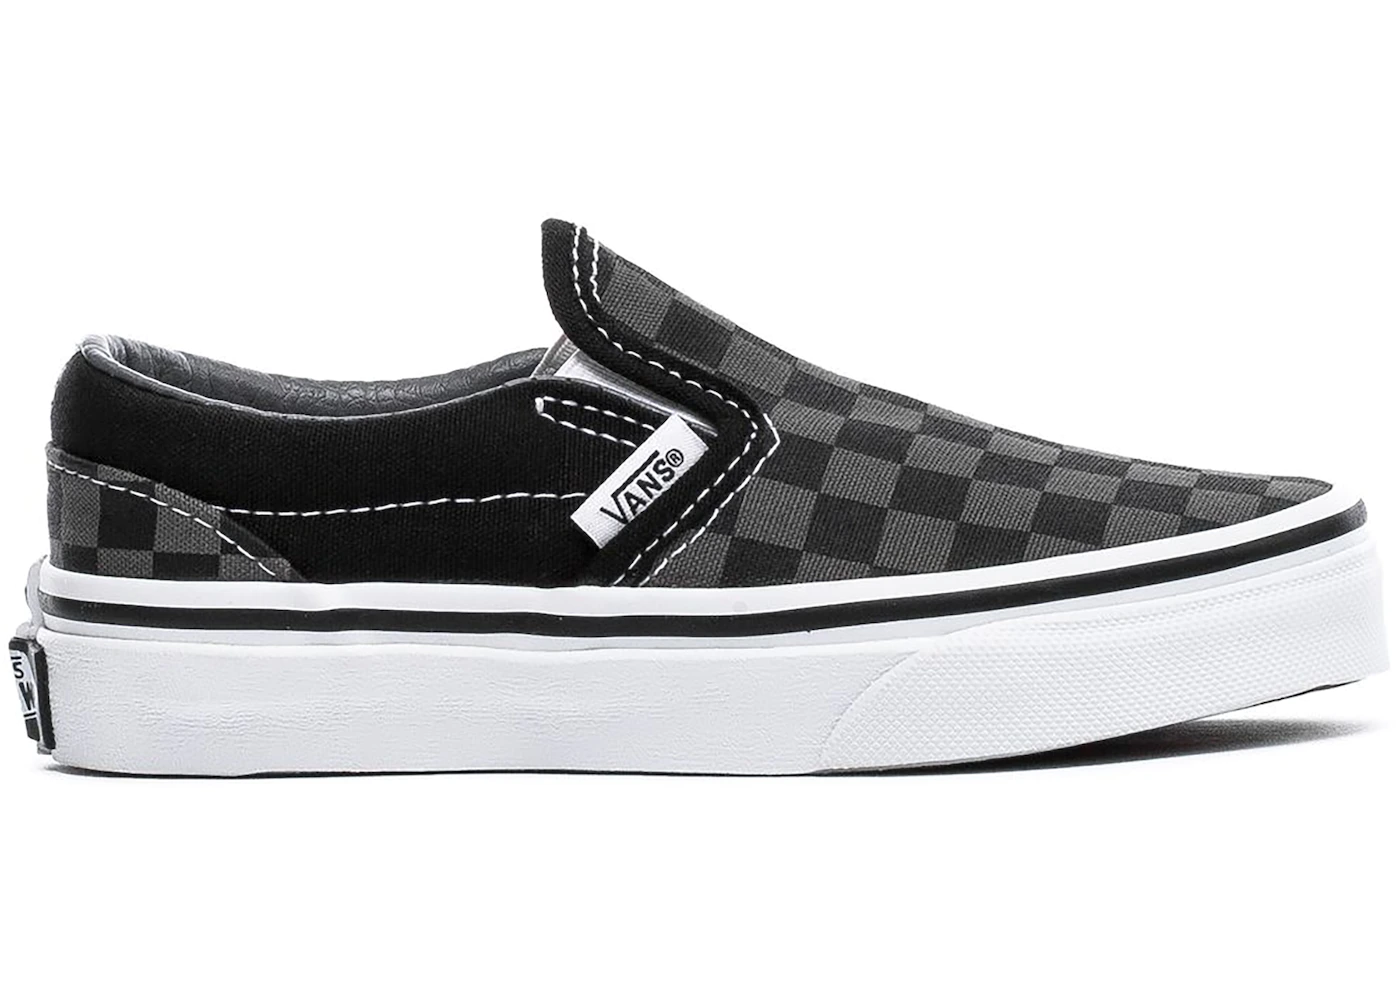 Vans Classic Slip-On Checkerboard Pewter (PS) Kids' - VN000ZBUEO0 - US